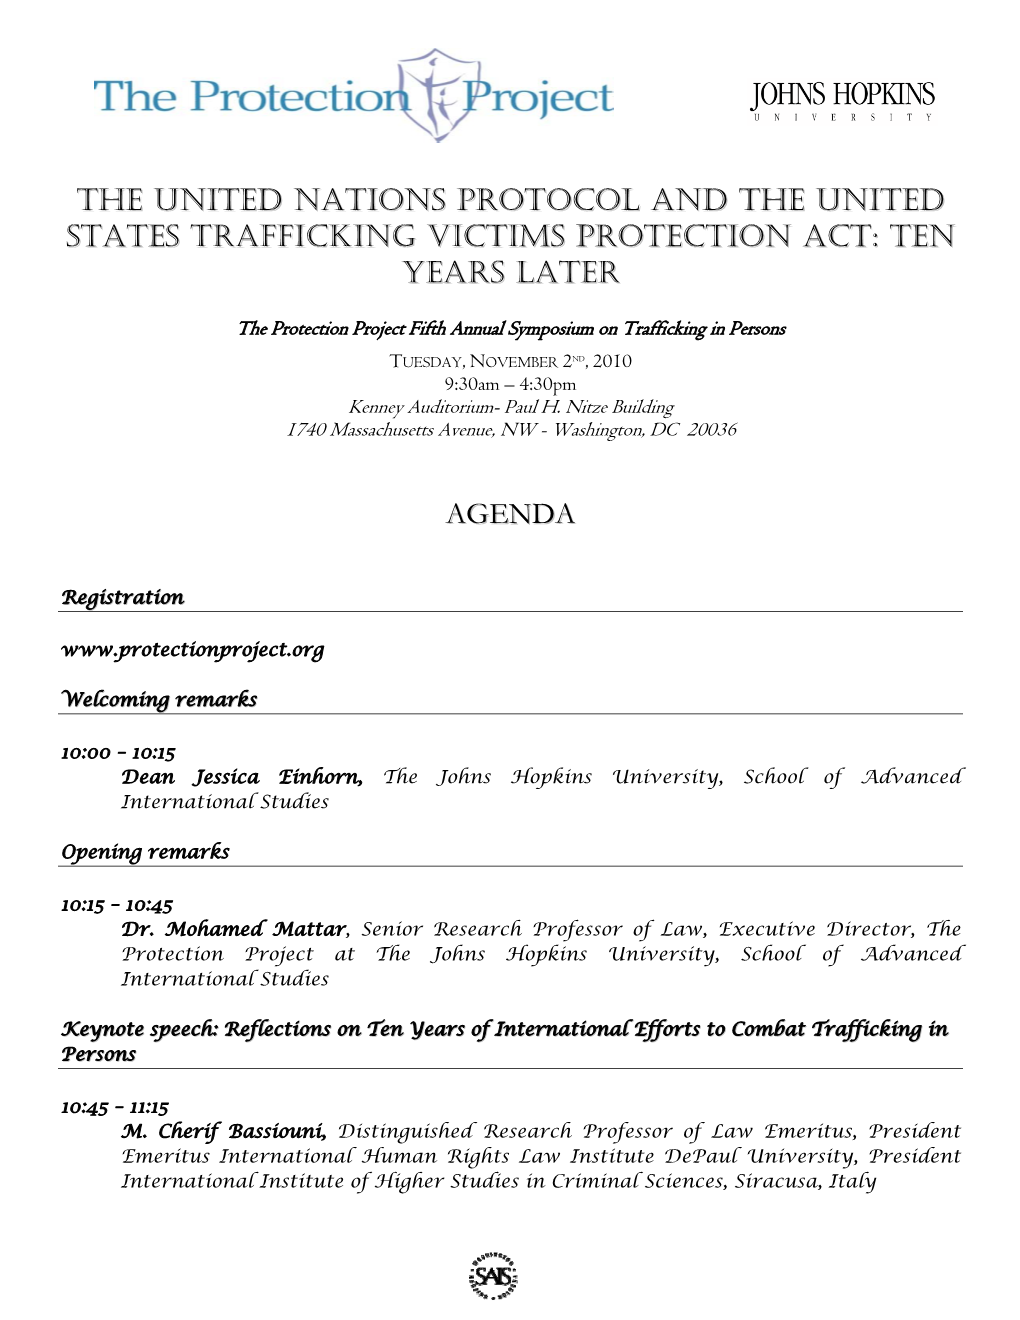 The United Nations Protocol and the United States Trafficking Victims Protection Act: Ten Years Later Agenda